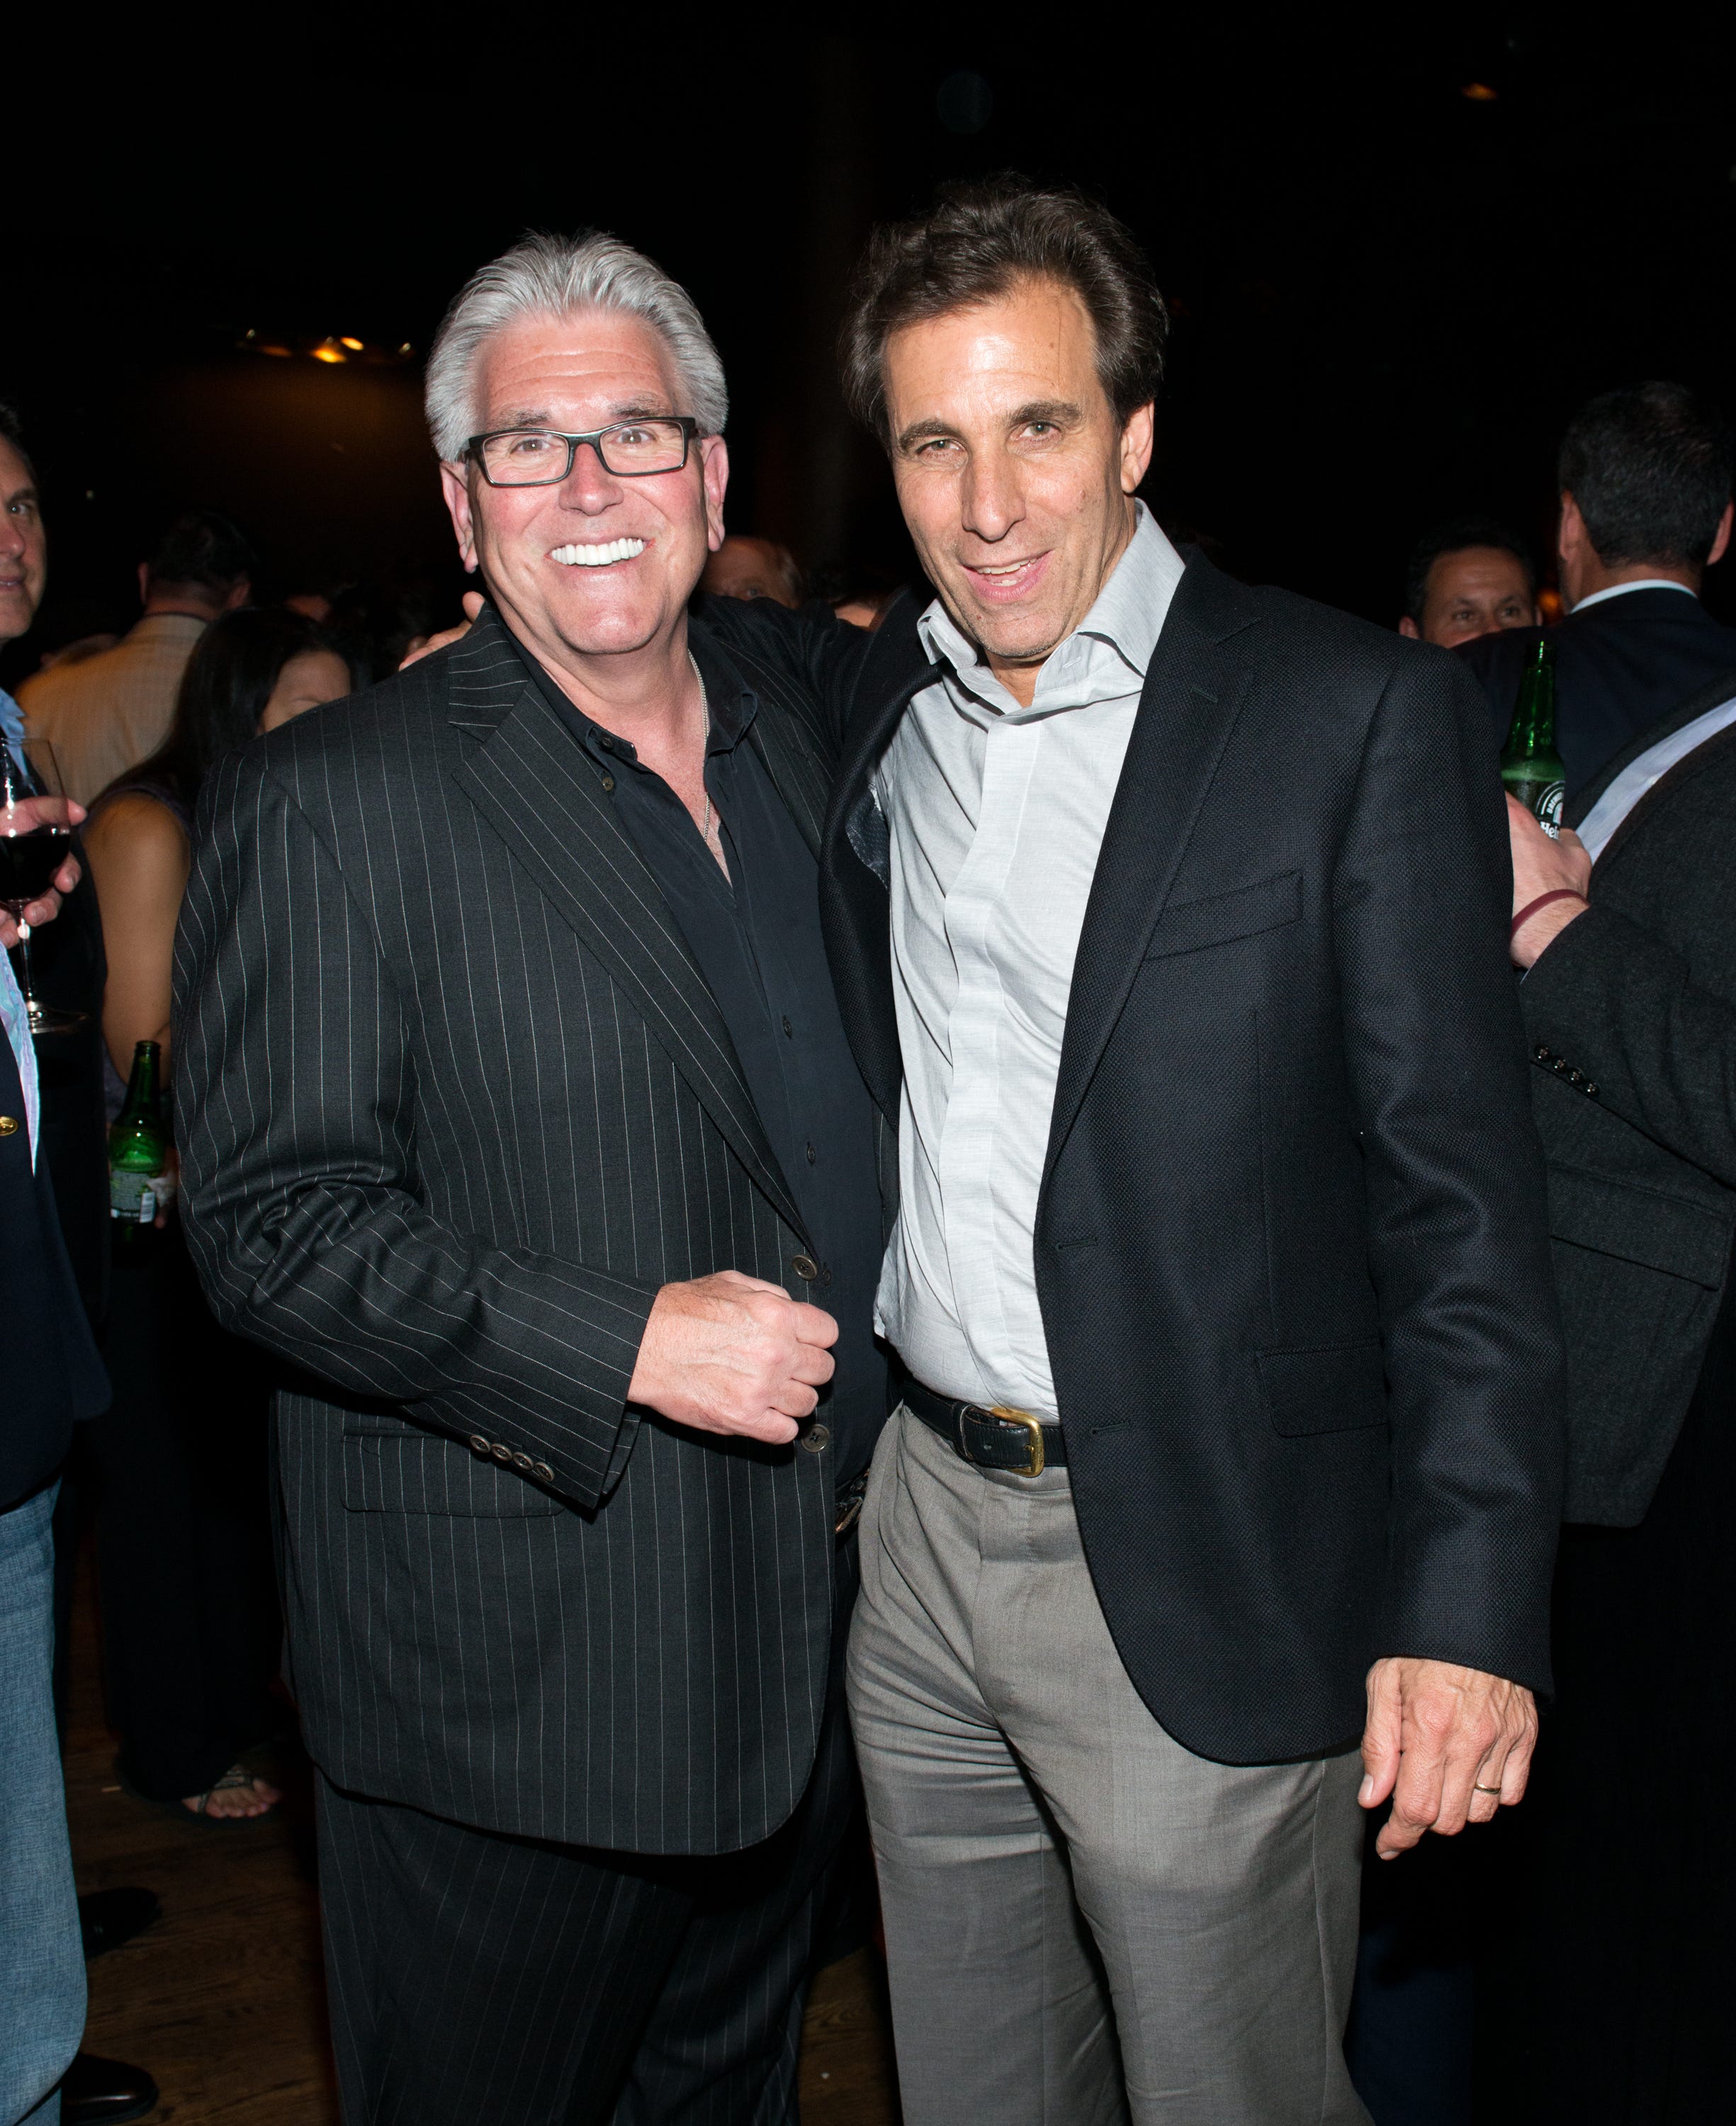 Sports talk radio 'pioneers' Mike Francesa and Chris 'Mad Dog' Russo reuniting on 'First Take'